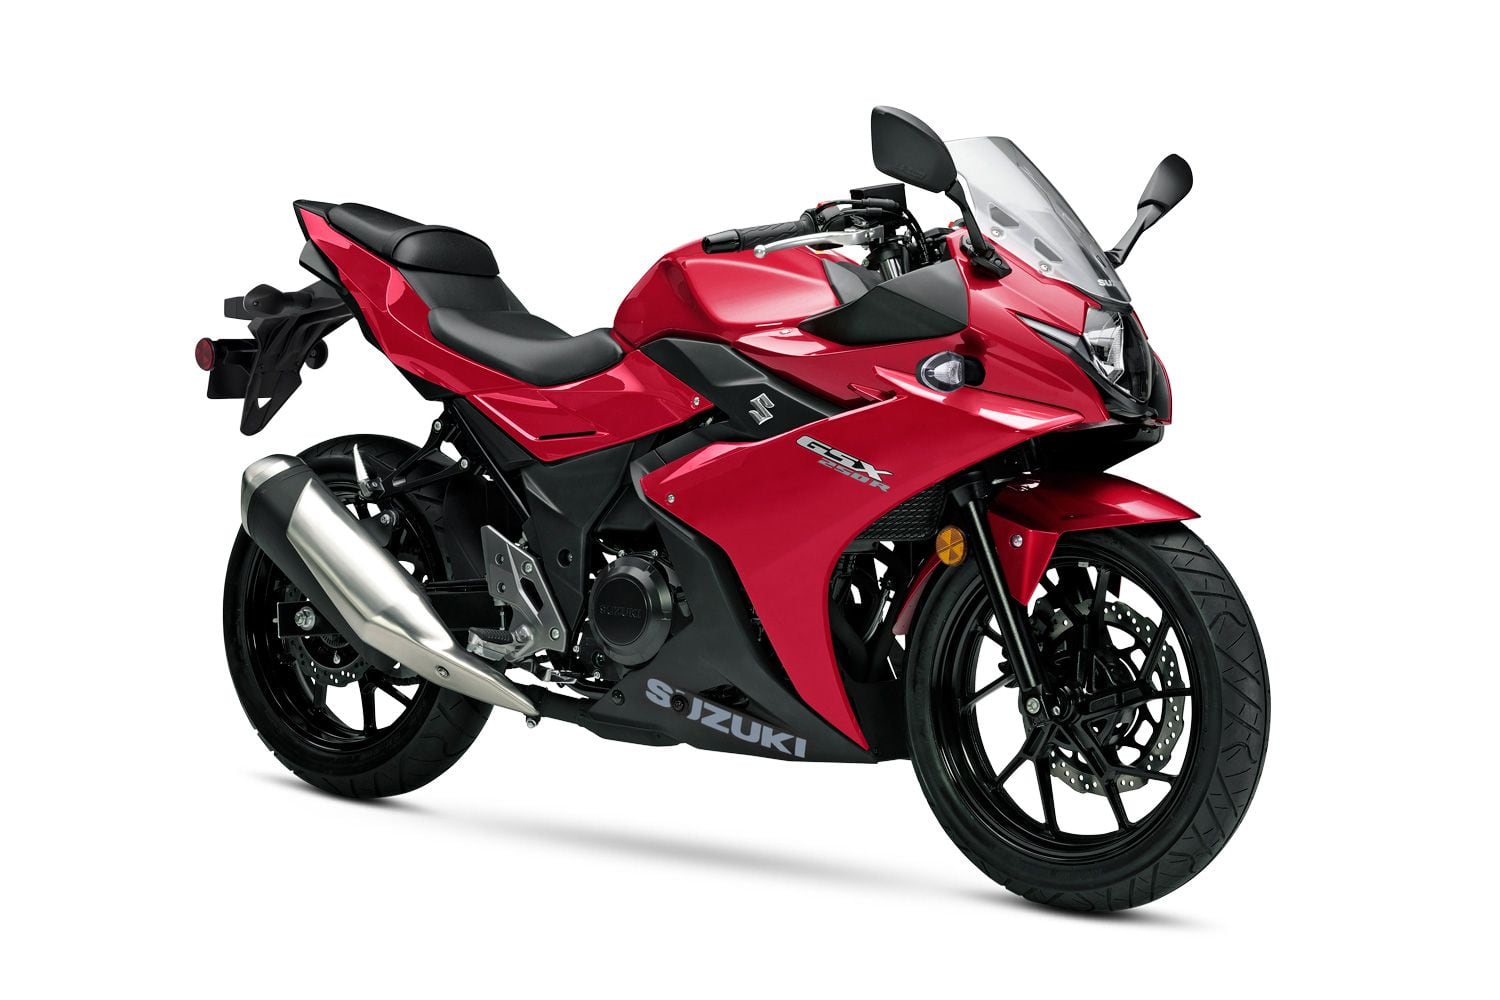 The same basic 248cc parallel twin that Suzuki is developing its VVT for is used in the GSX250R.